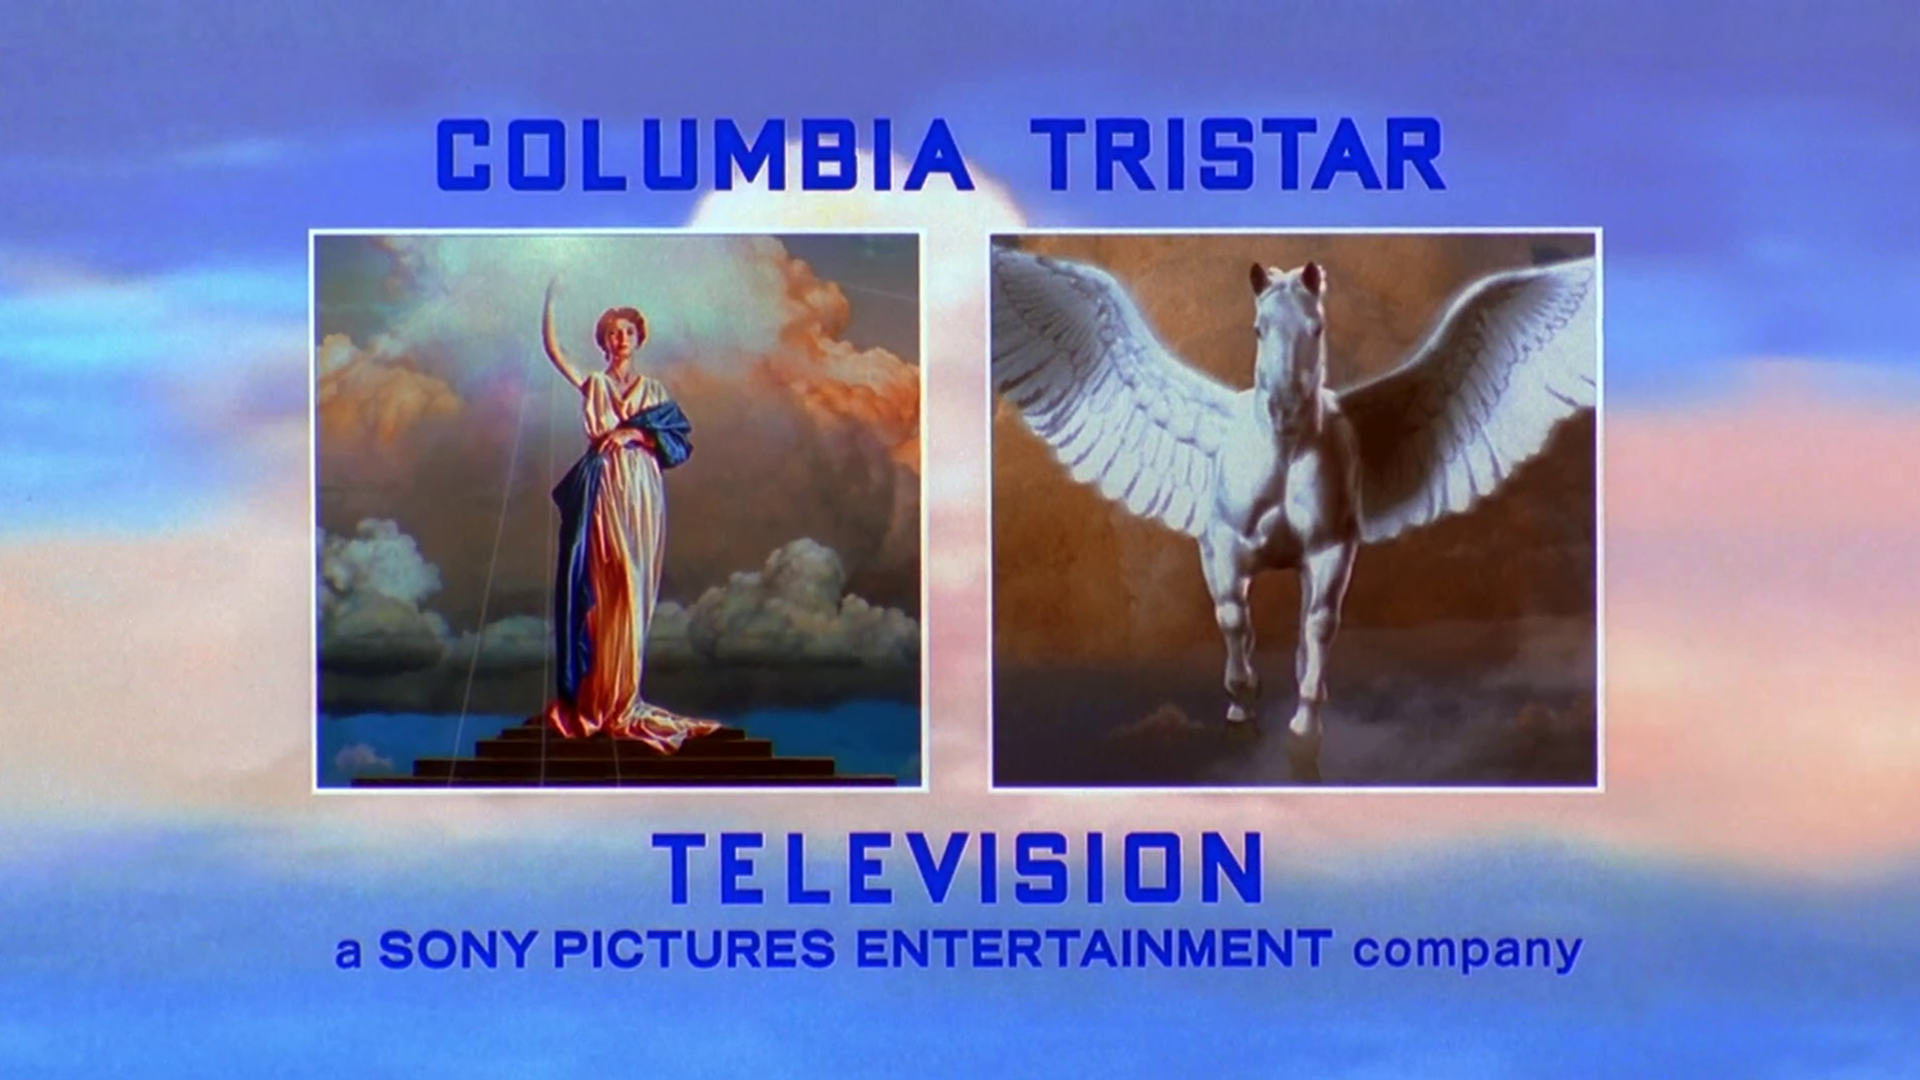 sony pictures greener world mrc sony be movie columbia pictures warner bros tristar pictures tm